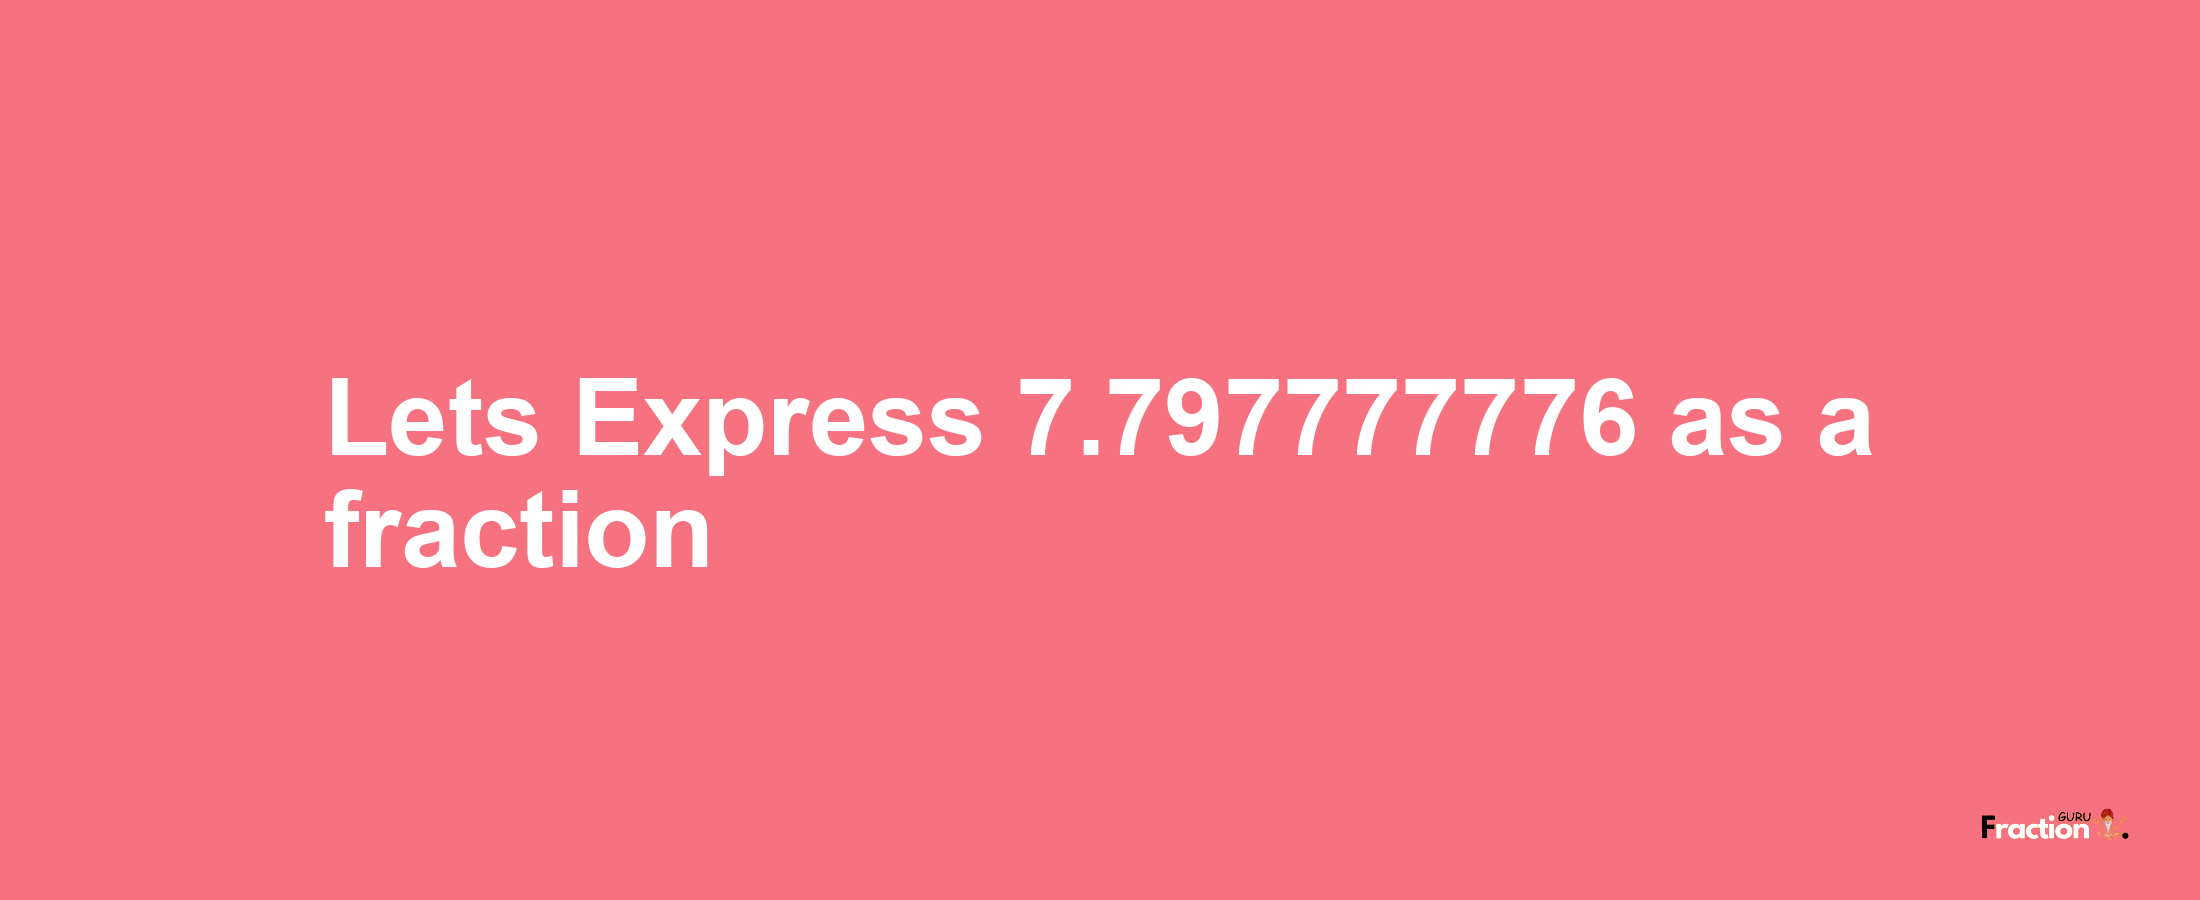 Lets Express 7.797777776 as afraction